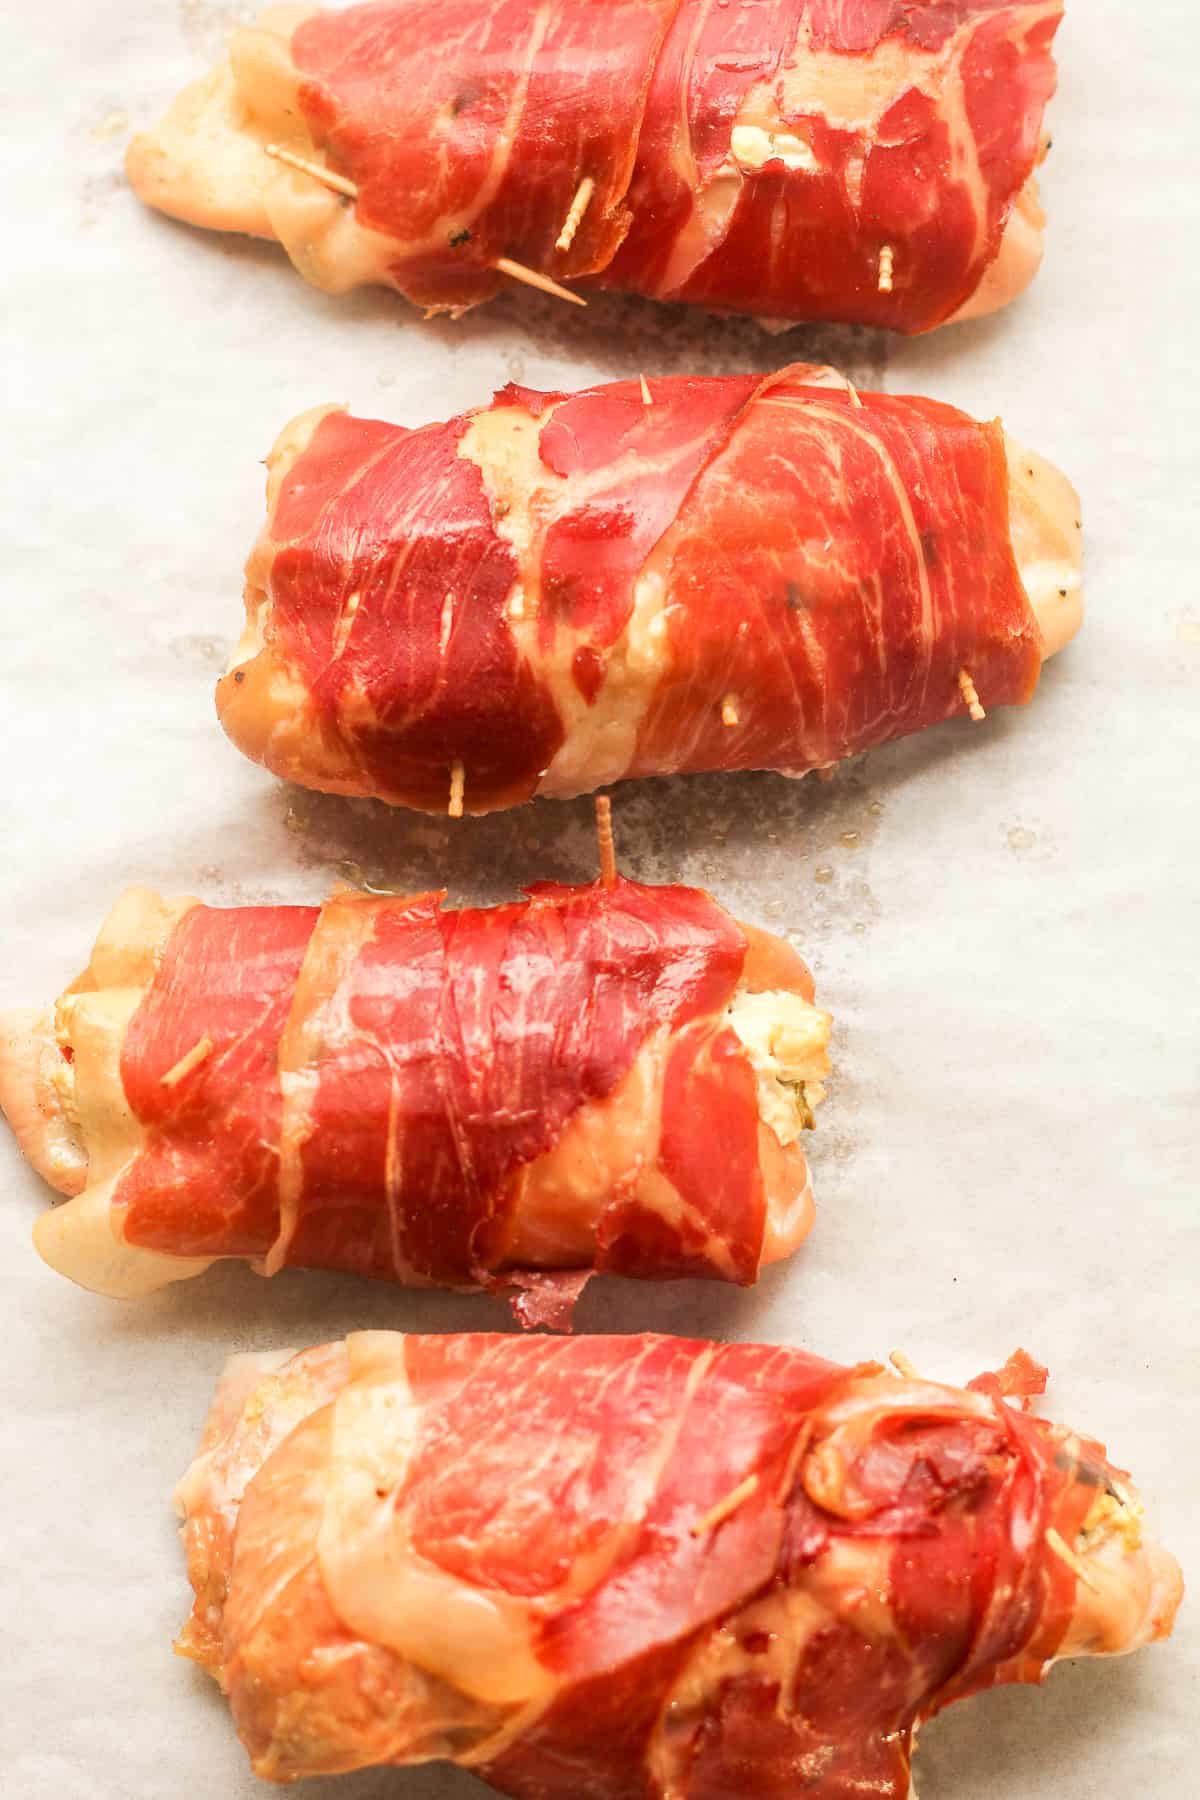 Overhead shot of four chicken breasts stuffed with goat cheese and wrapped in parma ham.